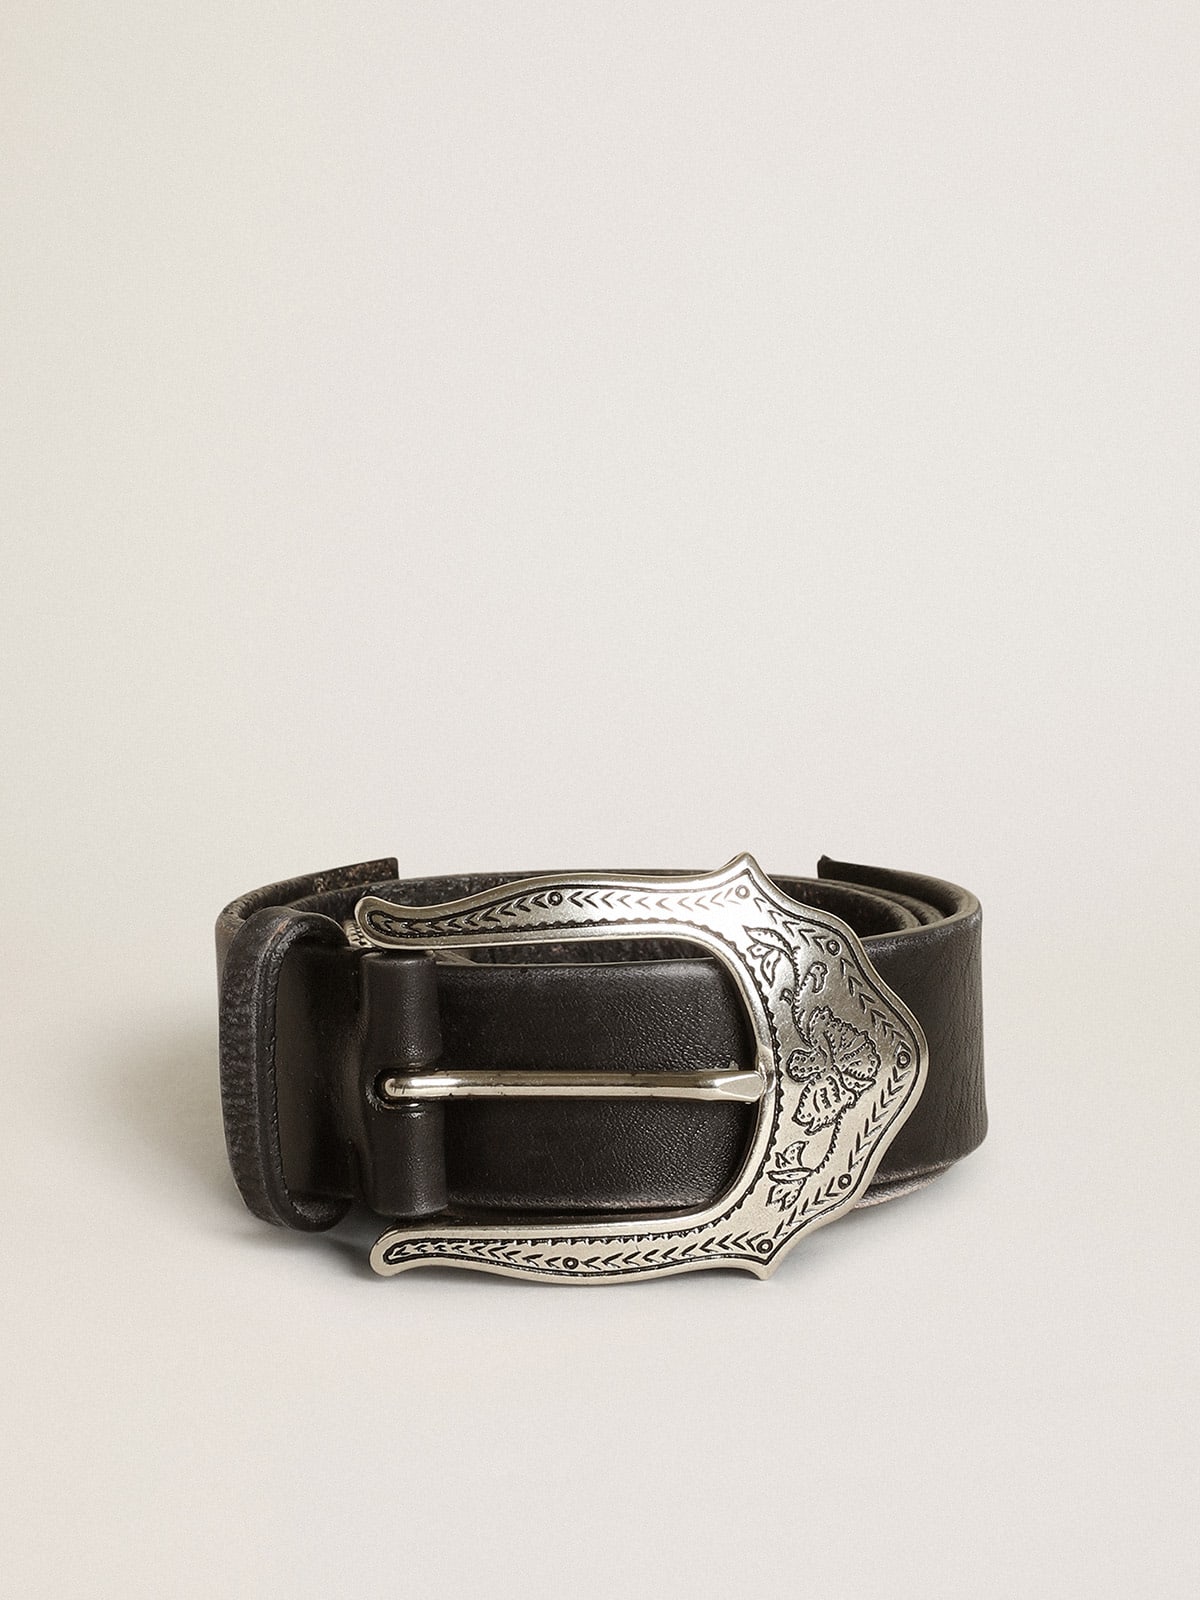 Twins belt in black leather with vintage silver colored decorations